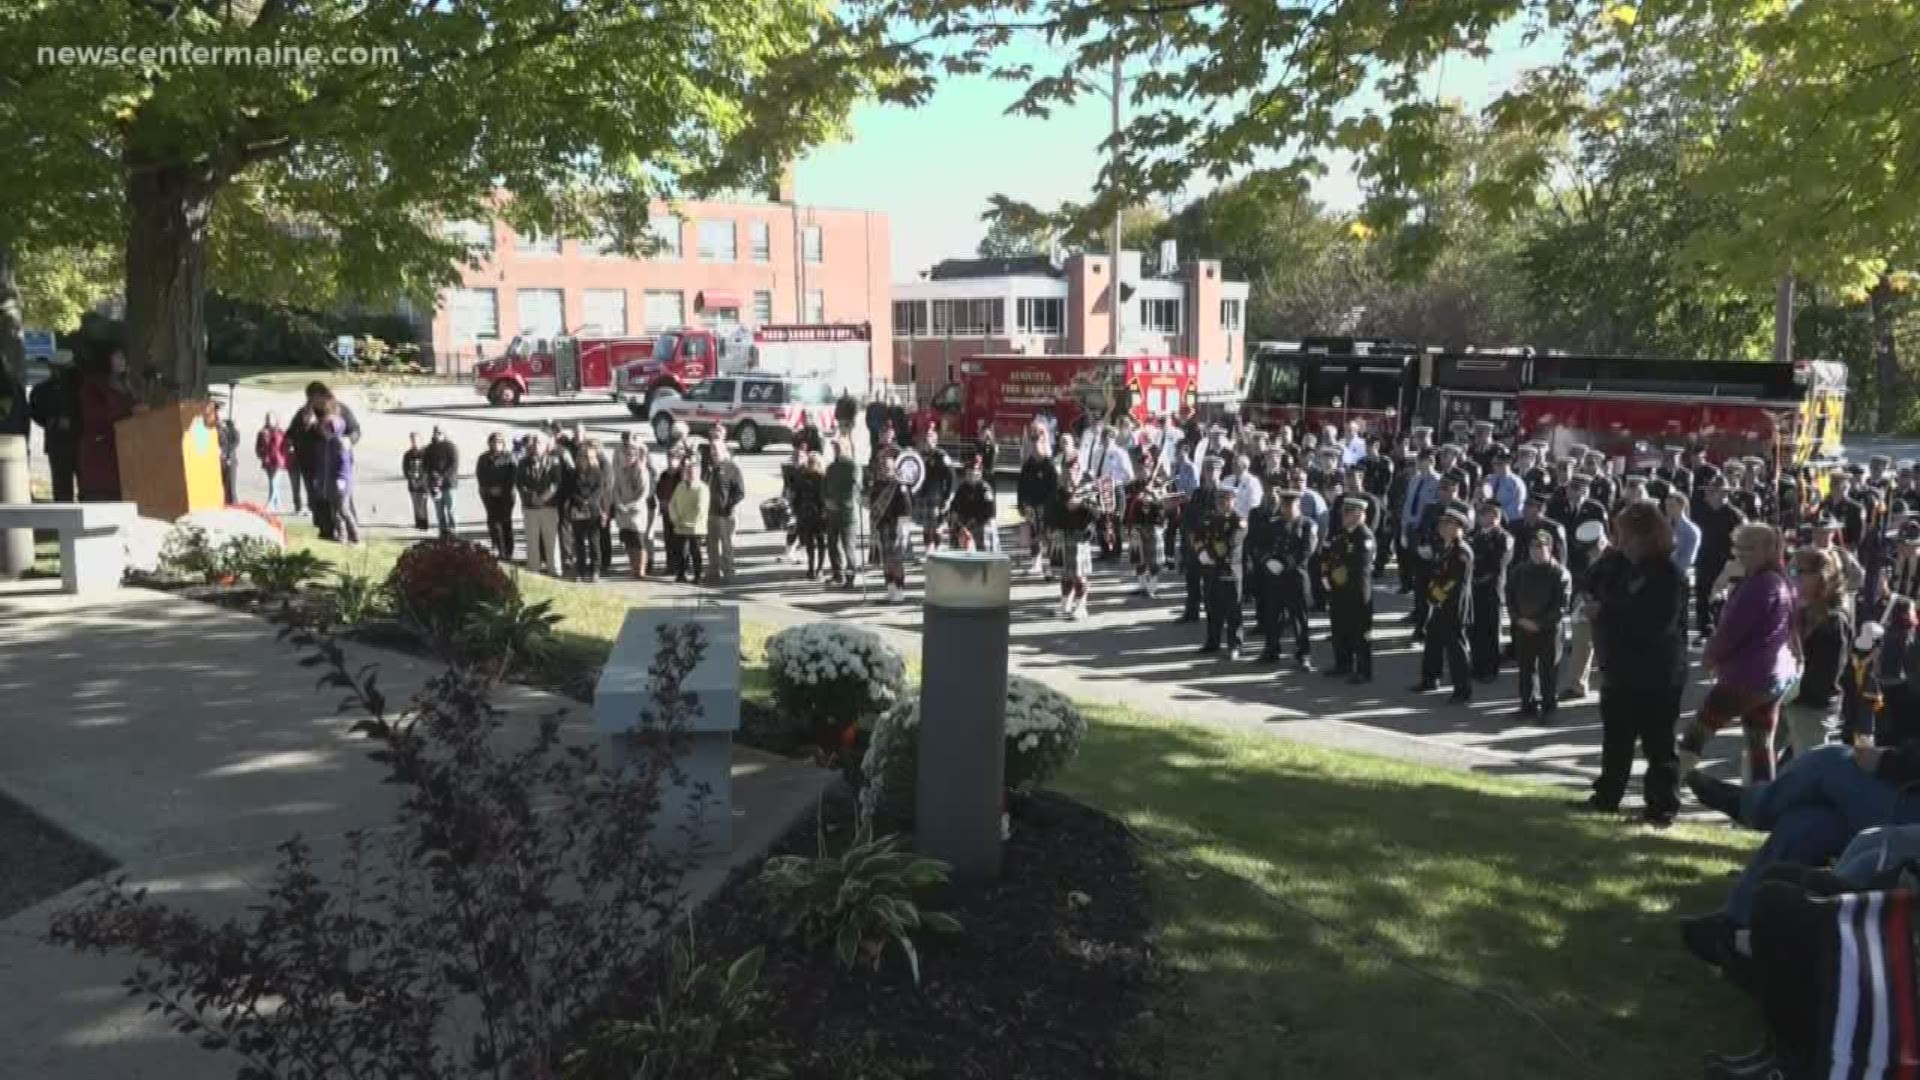 Firefighters, family, and friends came to the Maine Firefighters Memorial Service in Augusta to honor lives lost of fallen firefighters.